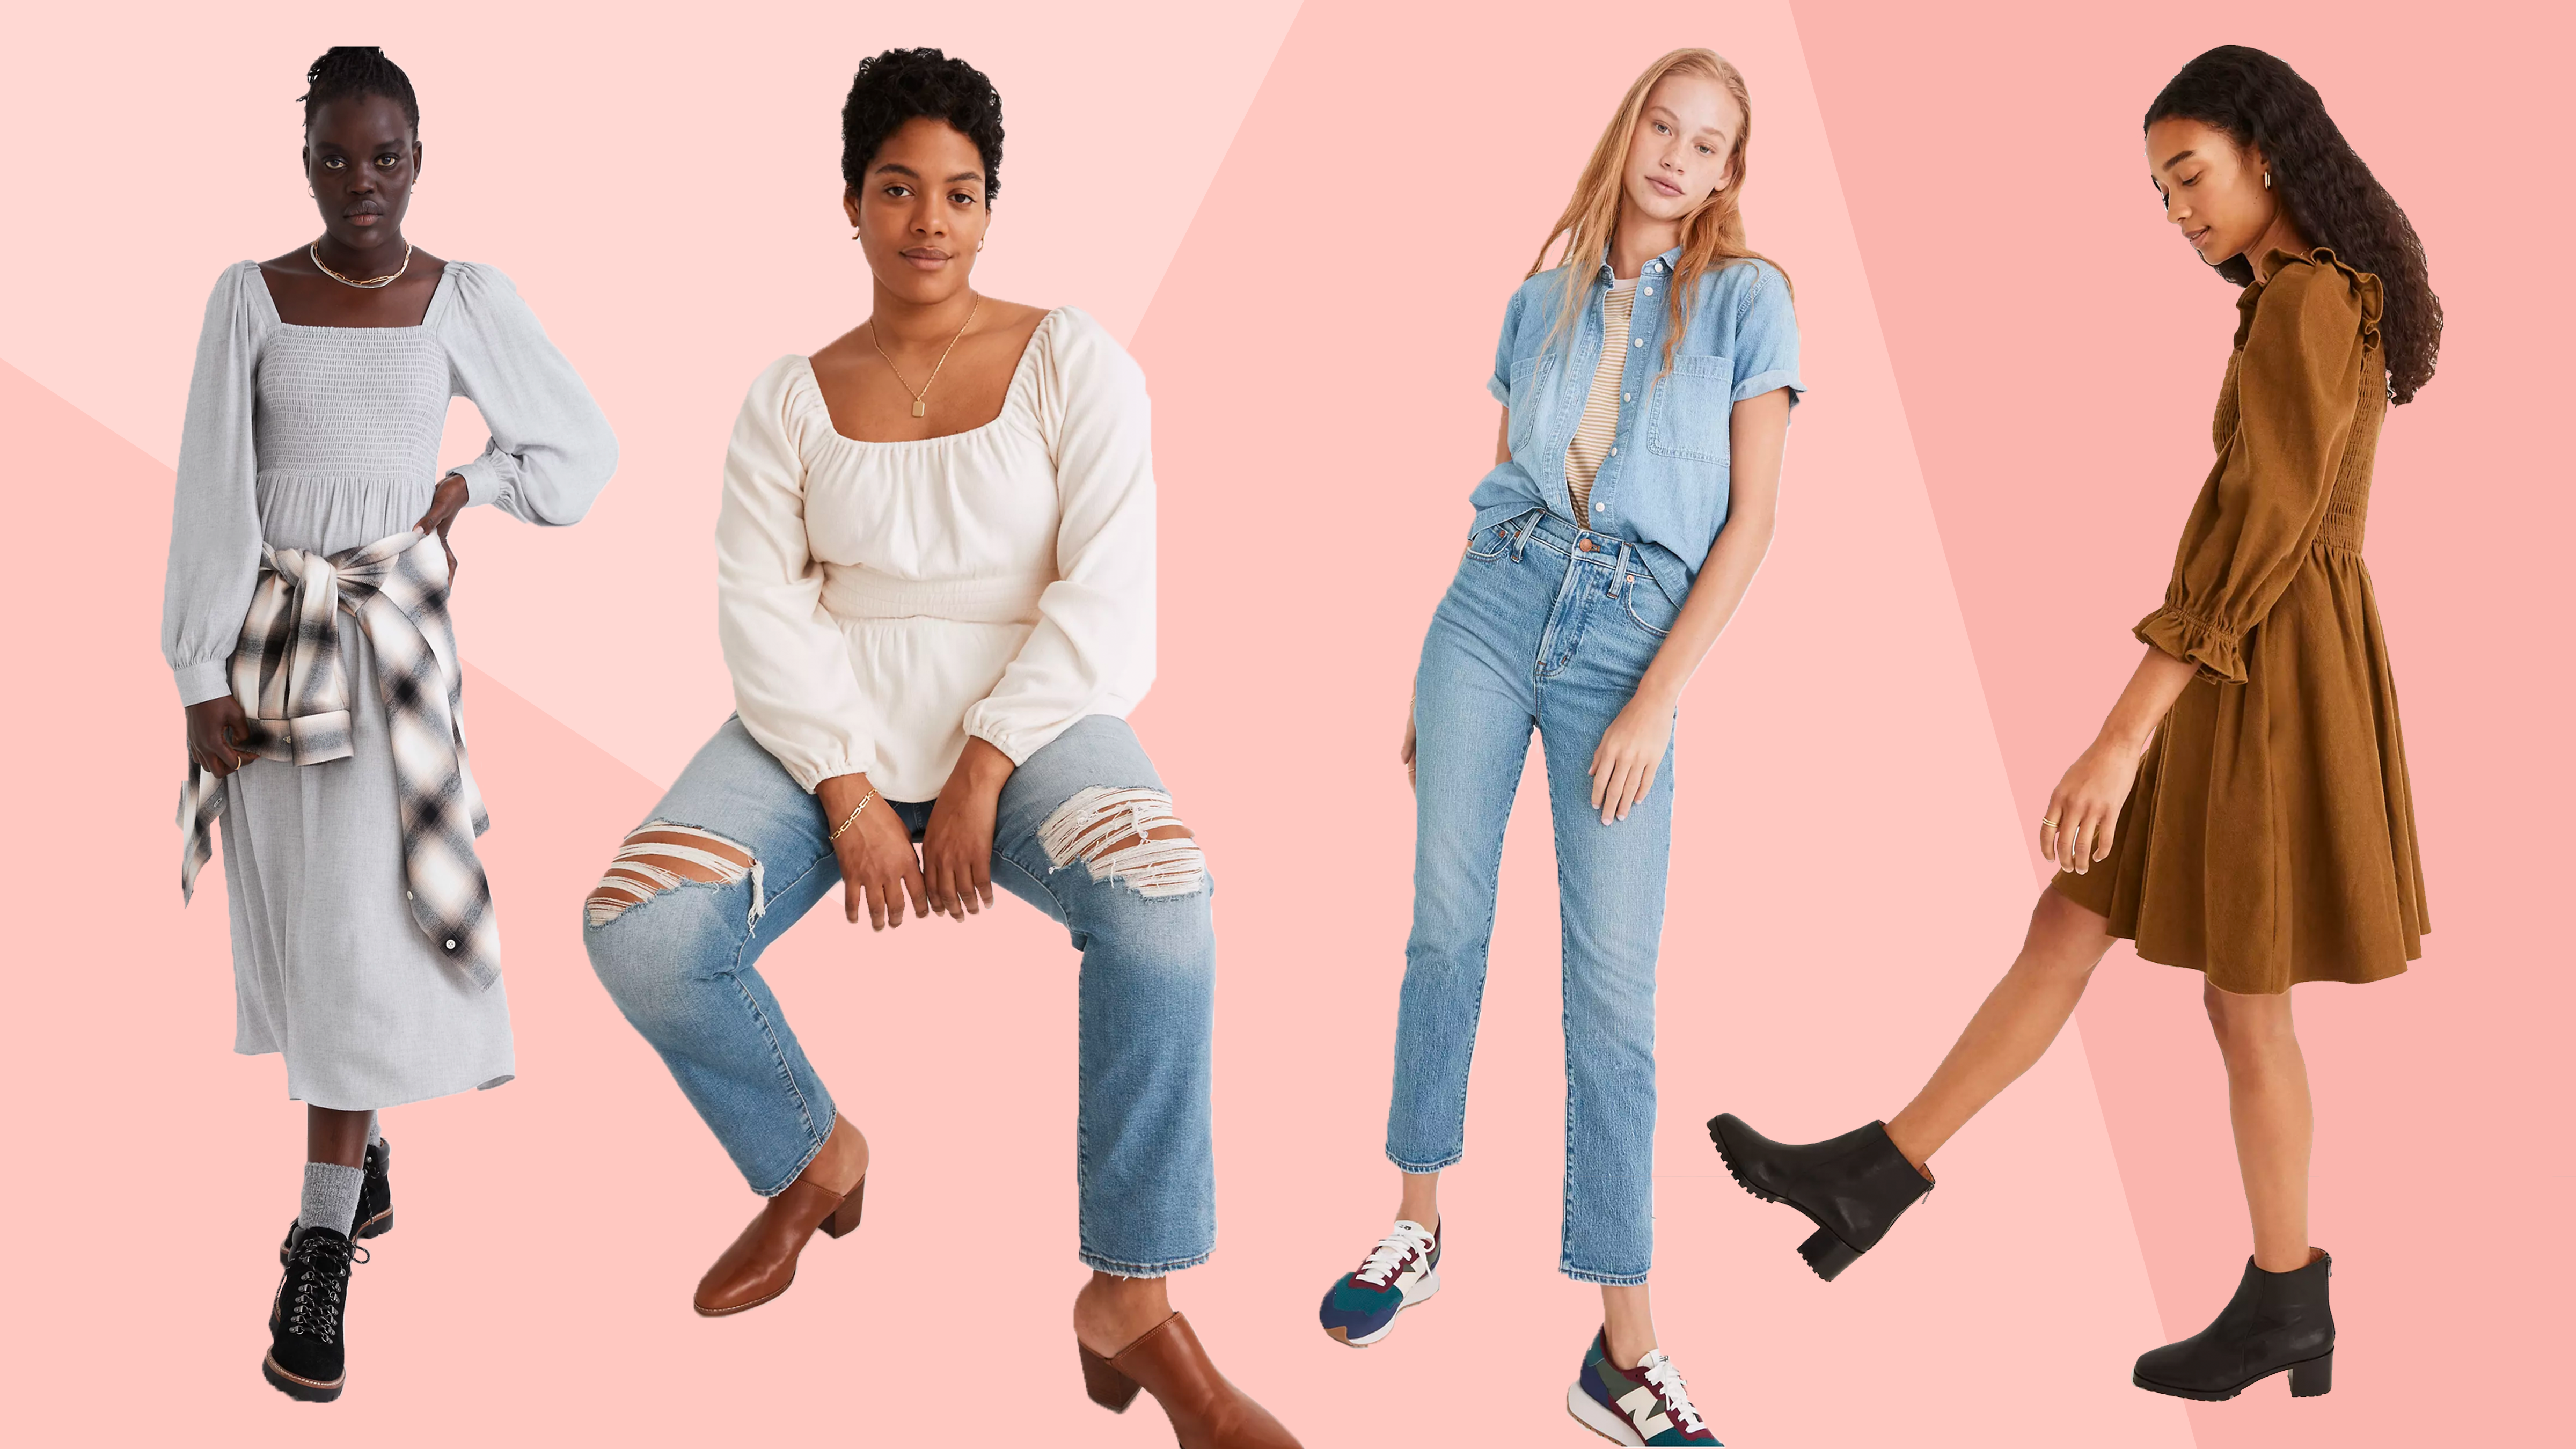 Get a pair of Madewell jeans for less than $24 during this blowout sale